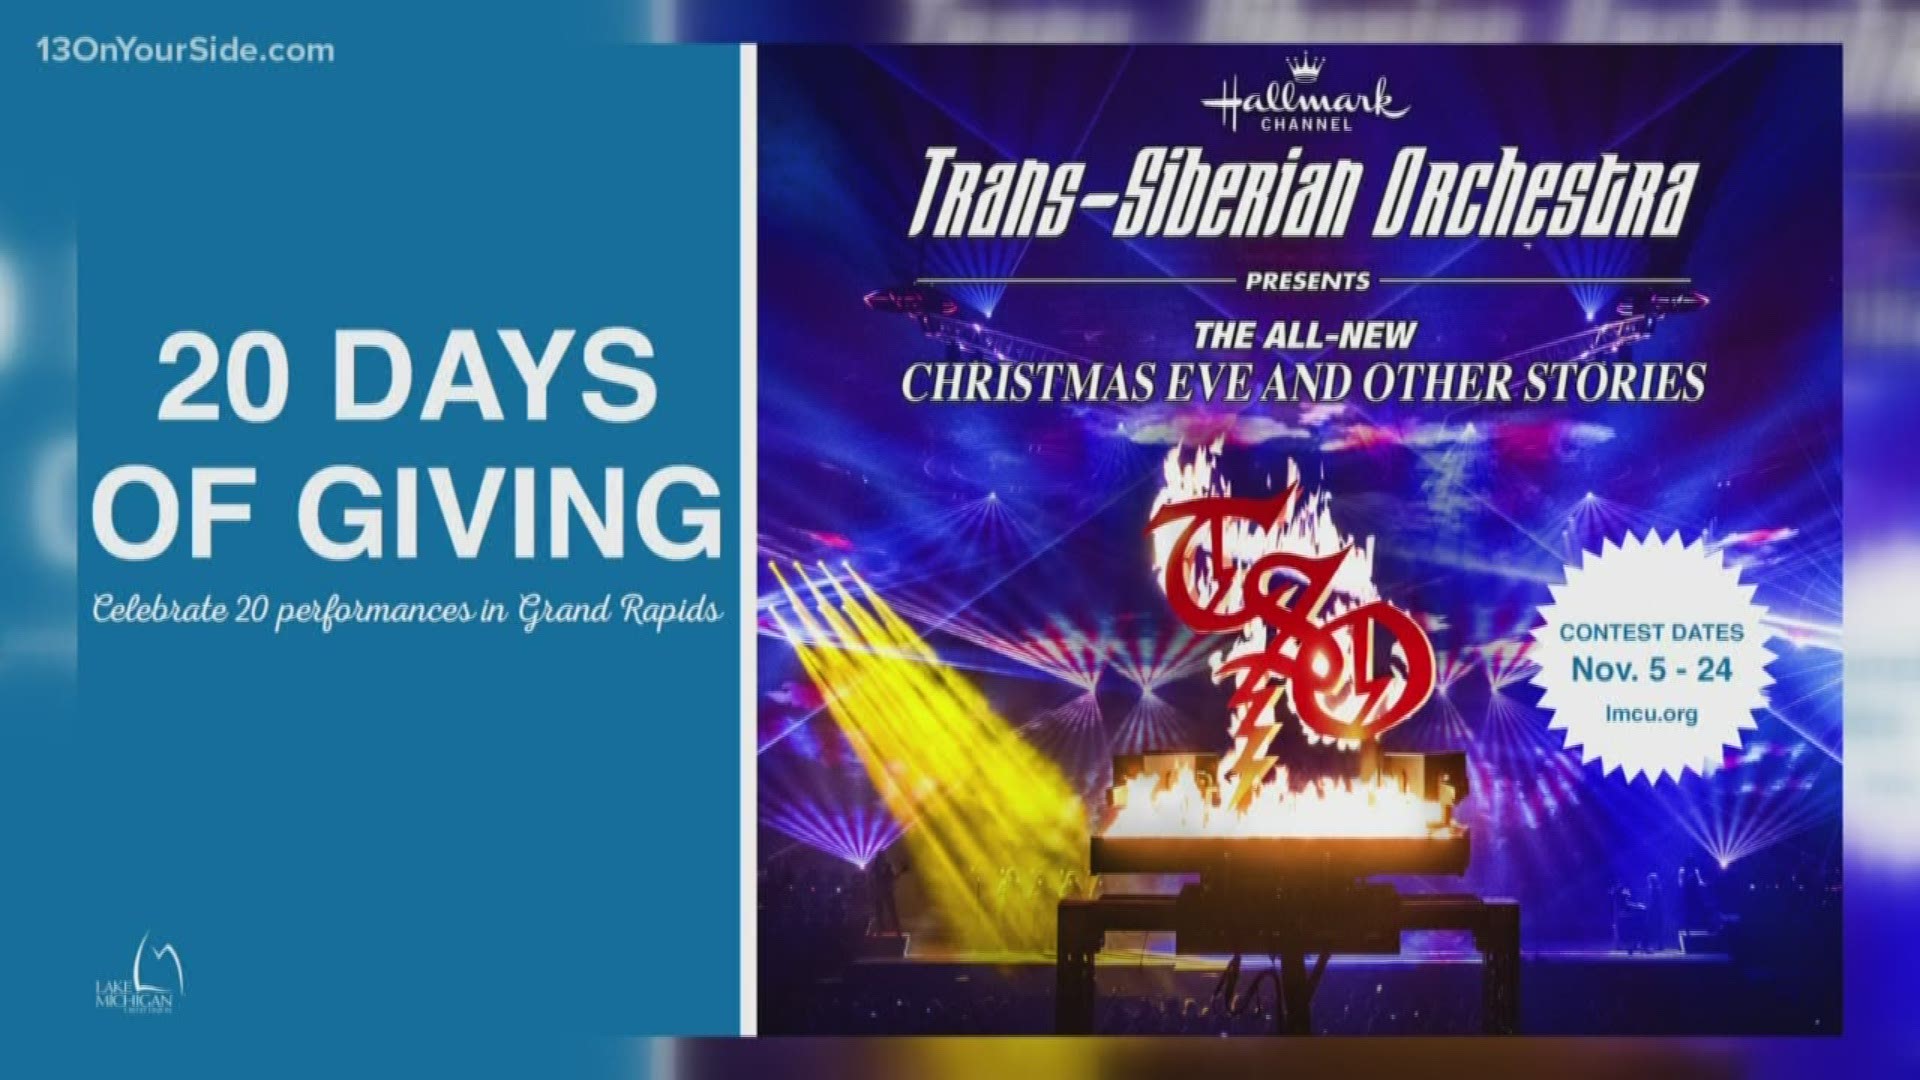 Over the next 20 days, Lake Michigan Credit Union and Van Andel Arena are giving away 20 pairs of tickets to attend the Trans-Siberian Orchestra show.